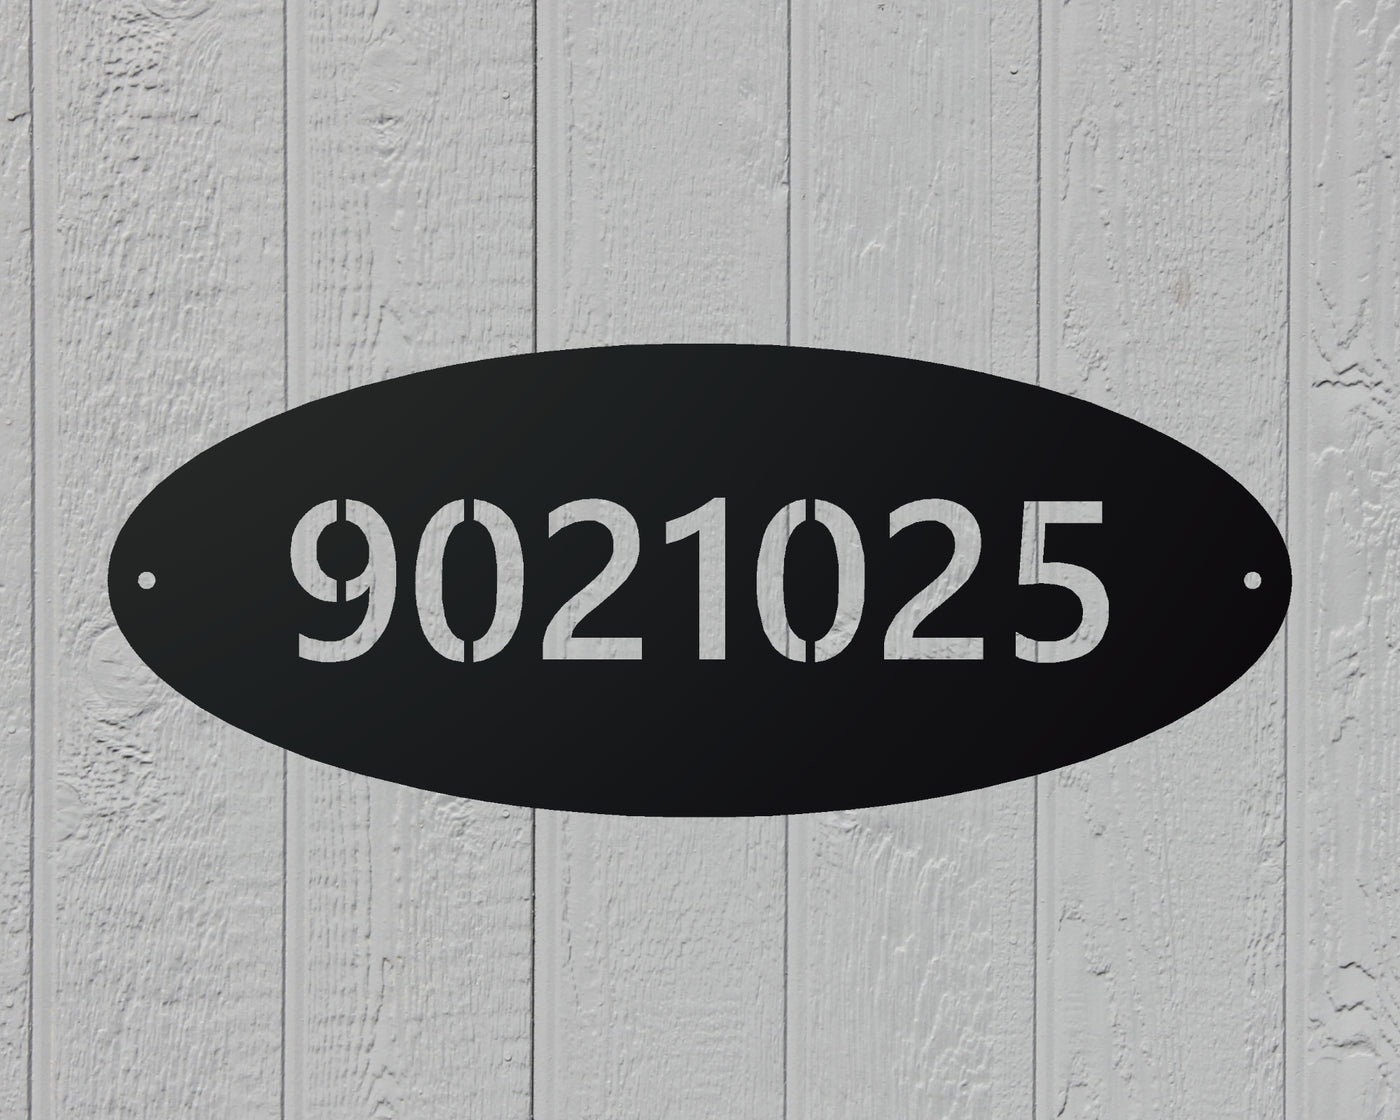 Personalized Oval House Number Metal Sign - Madison Iron and Wood - Address Sign - metal outdoor decor - Steel deocrations - american made products - veteran owned business products - fencing decorations - fencing supplies - custom wall decorations - personalized wall signs - steel - decorative post caps - steel post caps - metal post caps - brackets - structural brackets - home improvement - easter - easter decorations - easter gift - easter yard decor